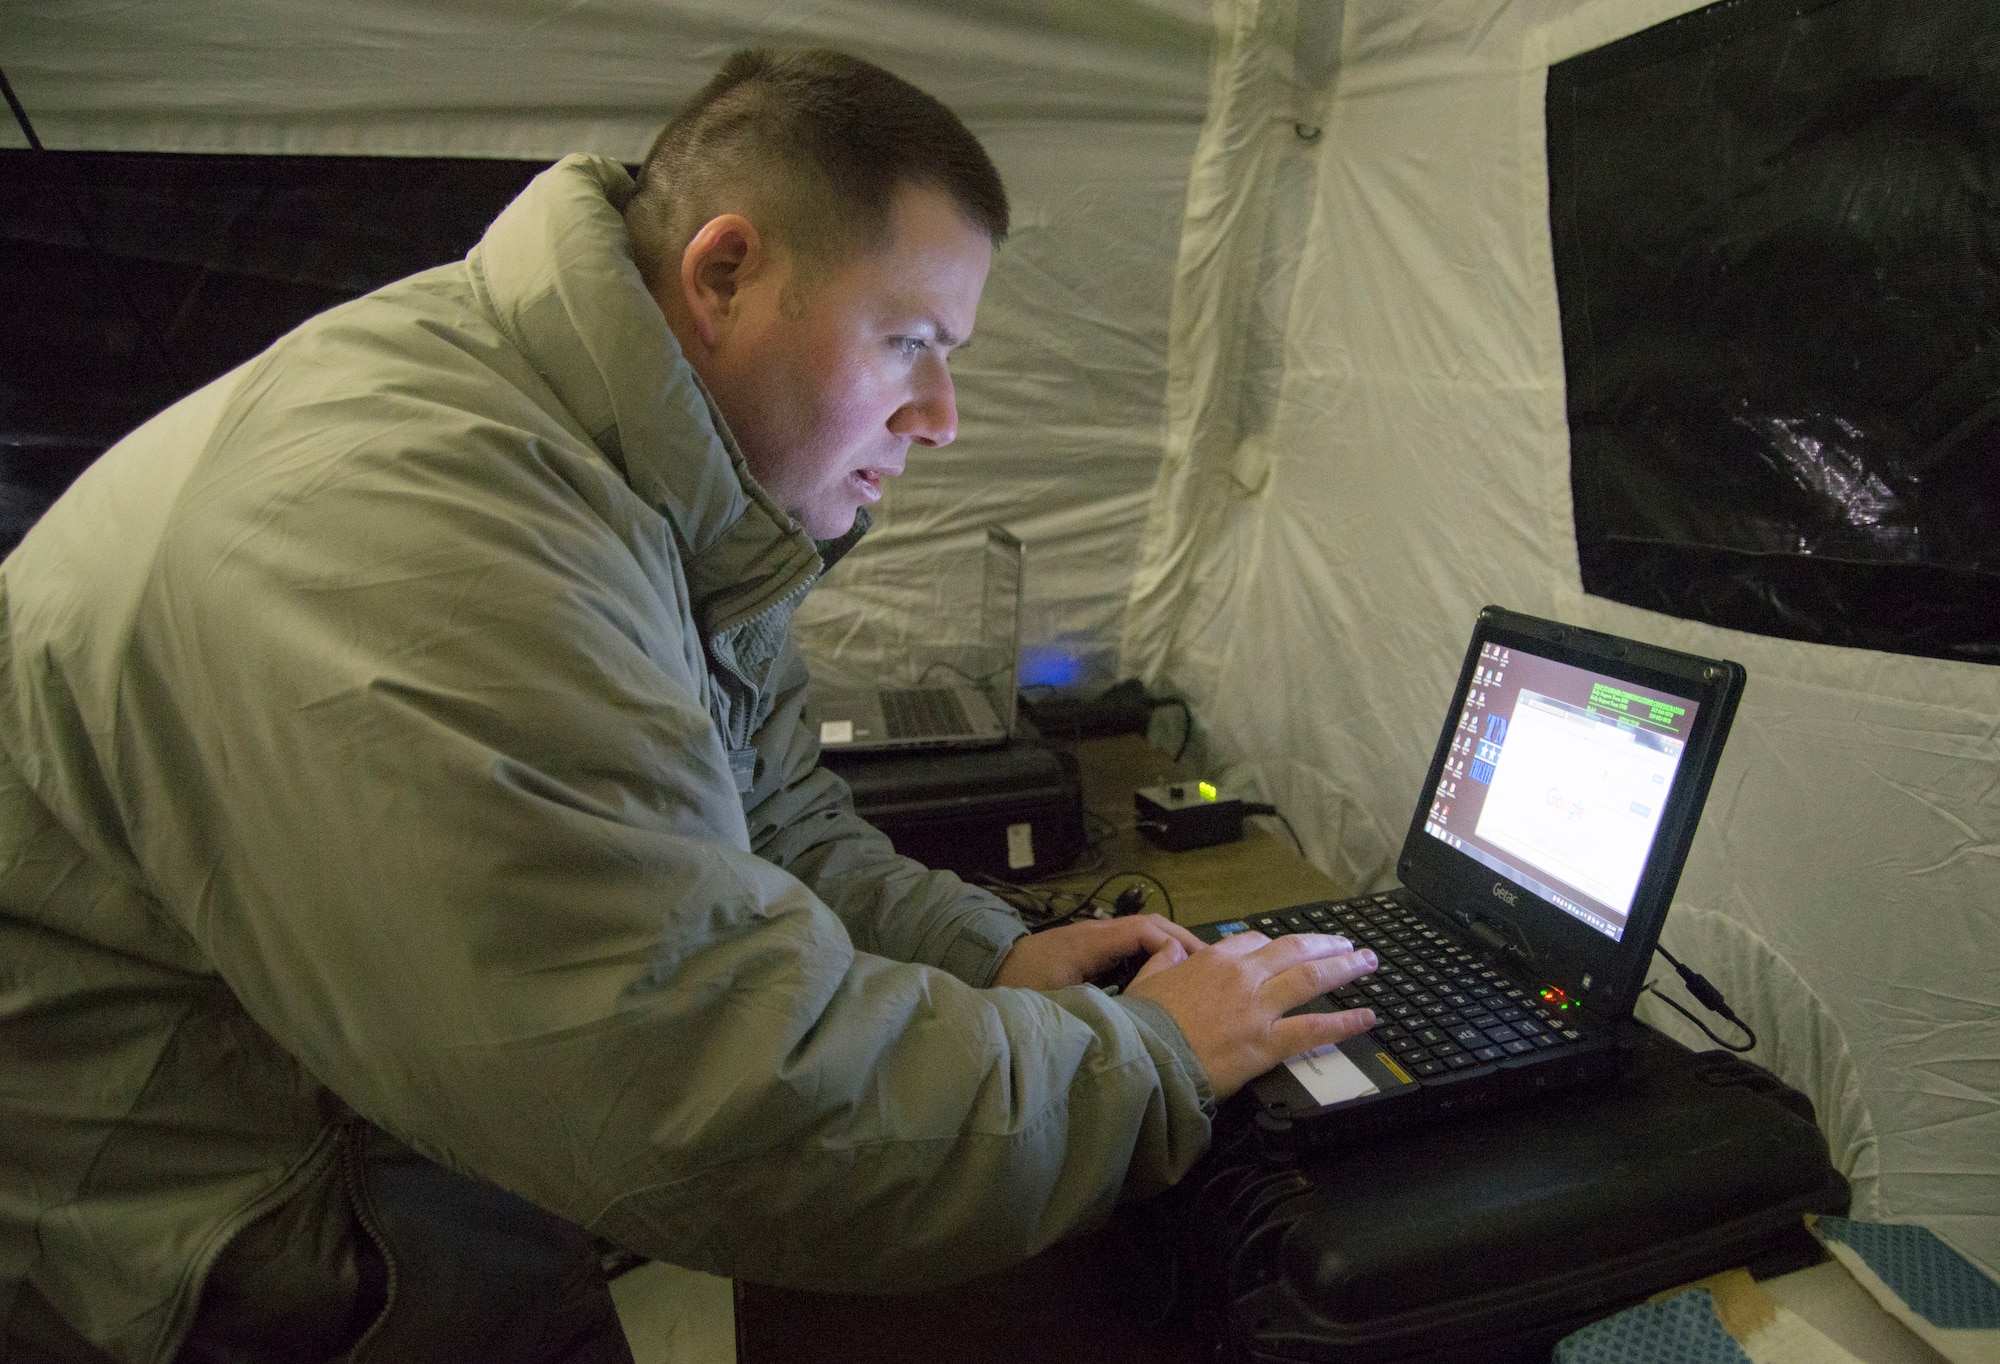 Tech. Sgt. Sean Newell, a radio frequency transmission systems technician, sets up a communication terminal during an aeromedical evacuation exercise Feb. 6, 2018, Scott Air Force Base, Illinois. The technicians use the terminal to access a secure website that allows for patient transport. He is with the 375th Communications Squadron but assigned to the 375th Aeromedical Evacuation Squadron as a member of the En-Route Patient Staging System team.  (U.S Air Force photo by Senior Airman Melissa Estevez)